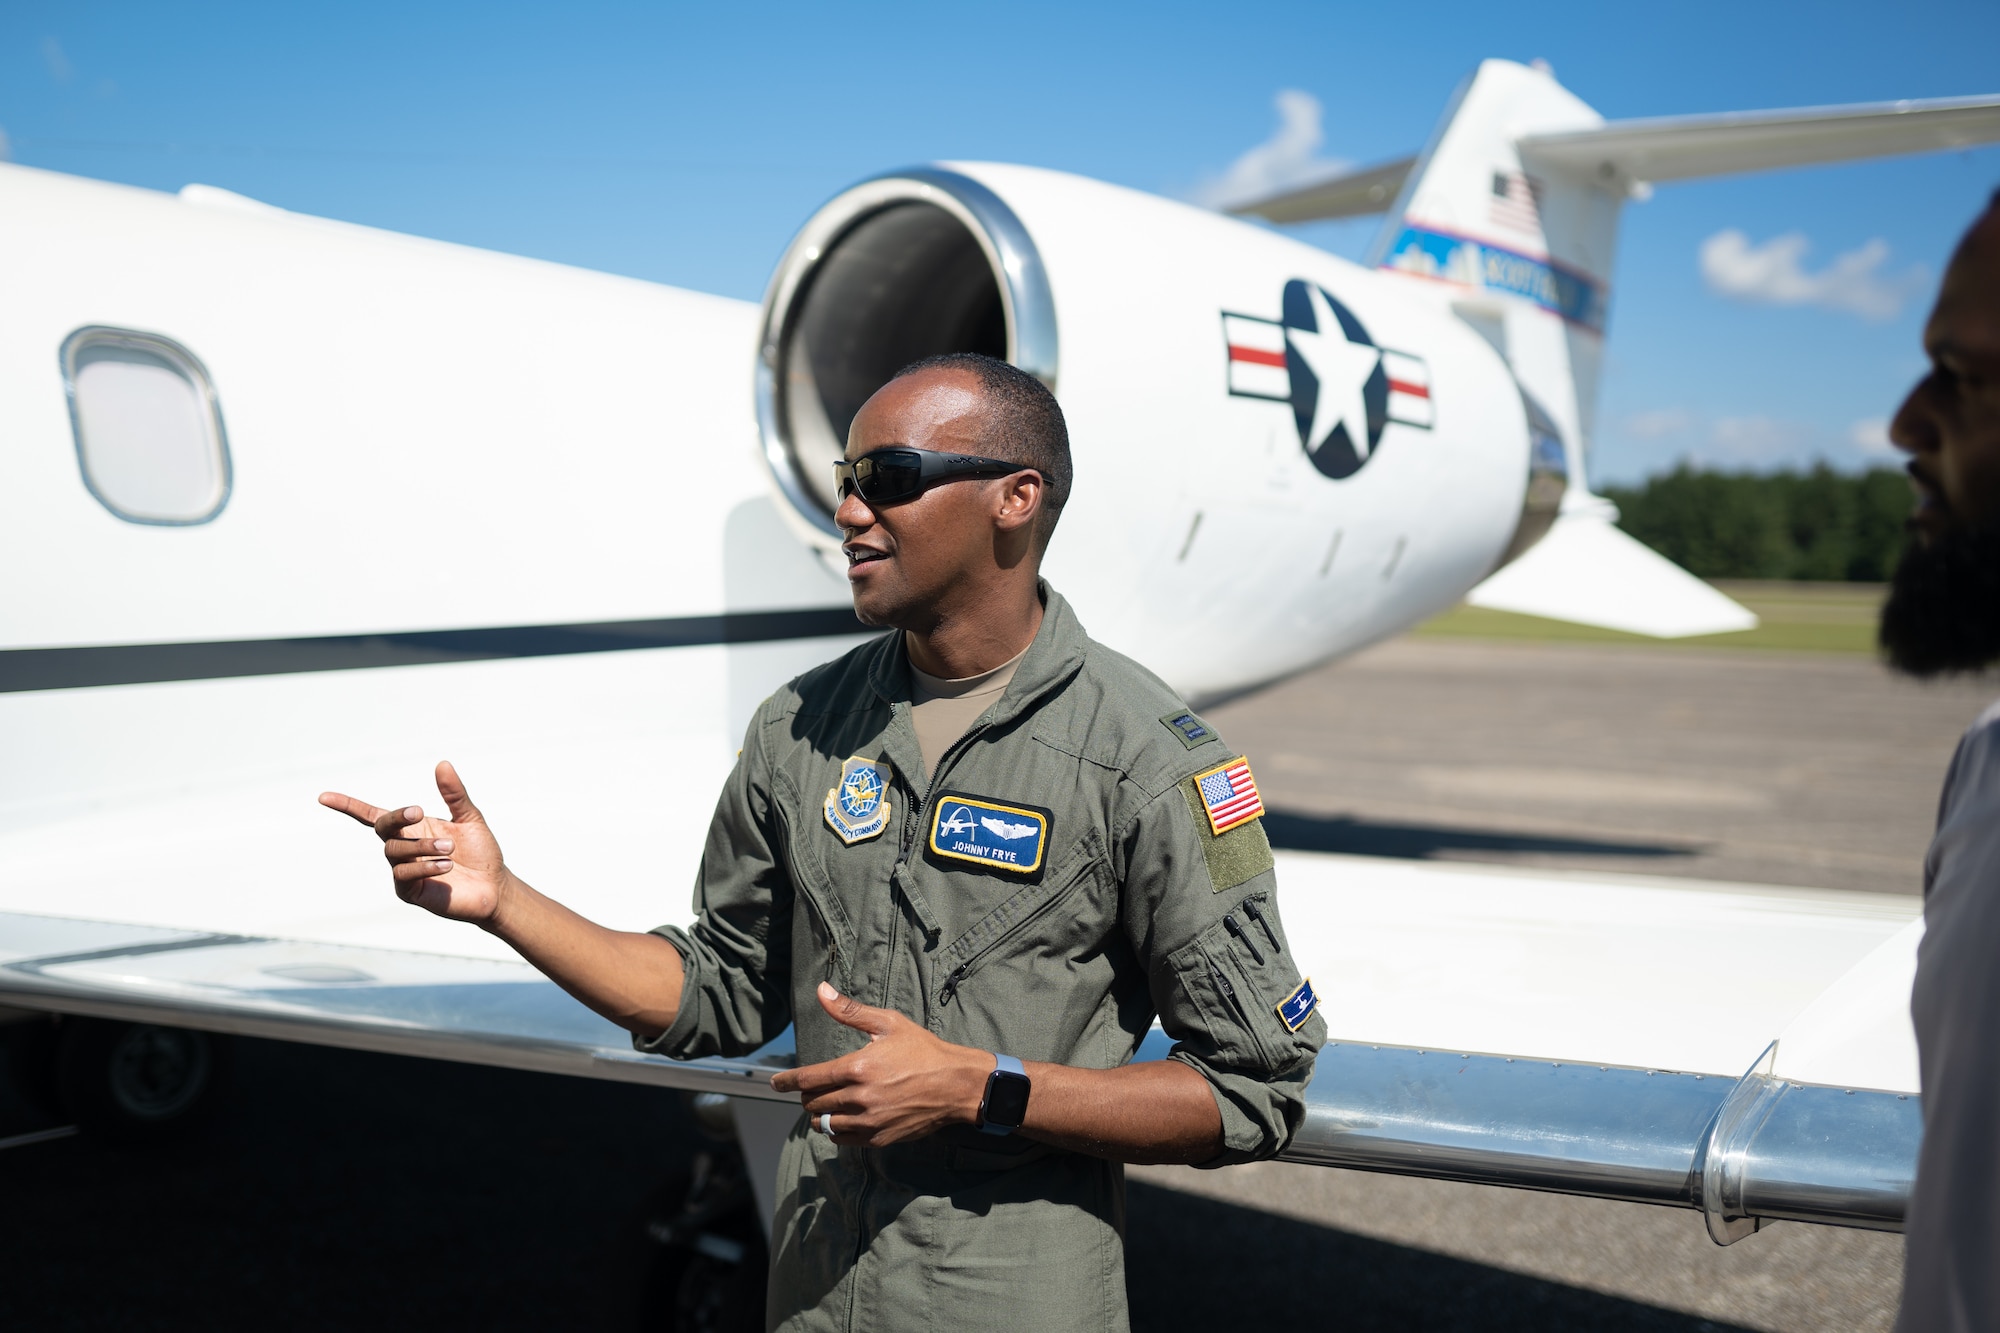 U.S. Air Force Capt. Johnny Frye, 458th Airlift Squadron, C-21 pilot, leads a tour of the aircraft during a visit to Tuskegee, Alabama, Sept. 28, 2021. The group of pilots from Scott AFB, Illinois made history as being the first all-African American crew to land the C-21 at Alabama's historic Tuskegee Airfield. (U.S. Air Force photo by 1st Lt. Sam Eckholm)